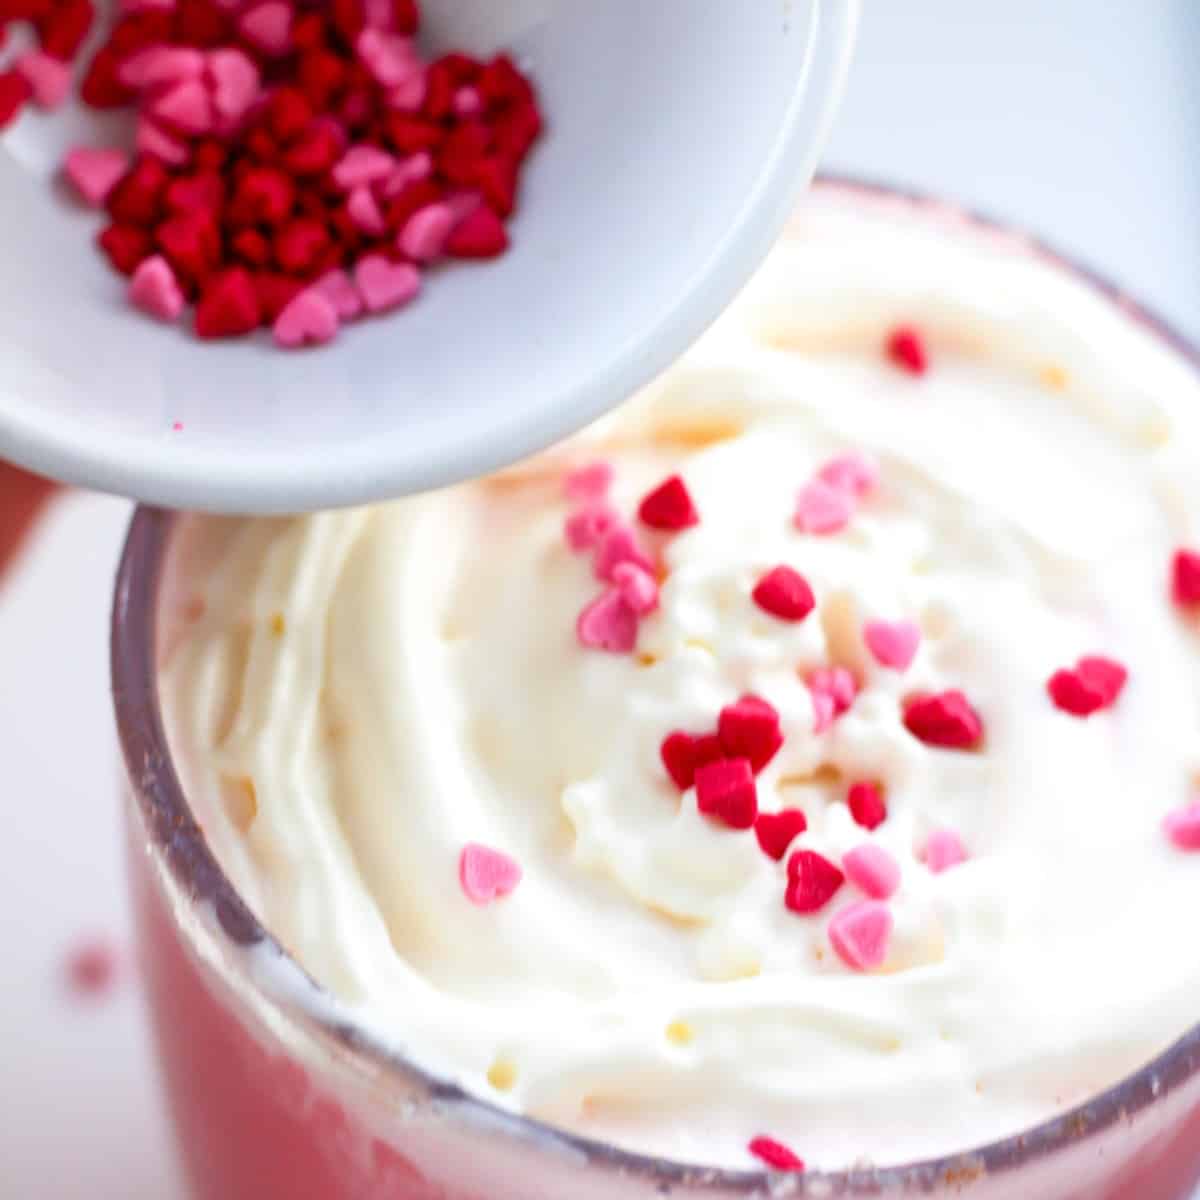 Add sprinkles to your red velvet hot chocolate as a finishing touch